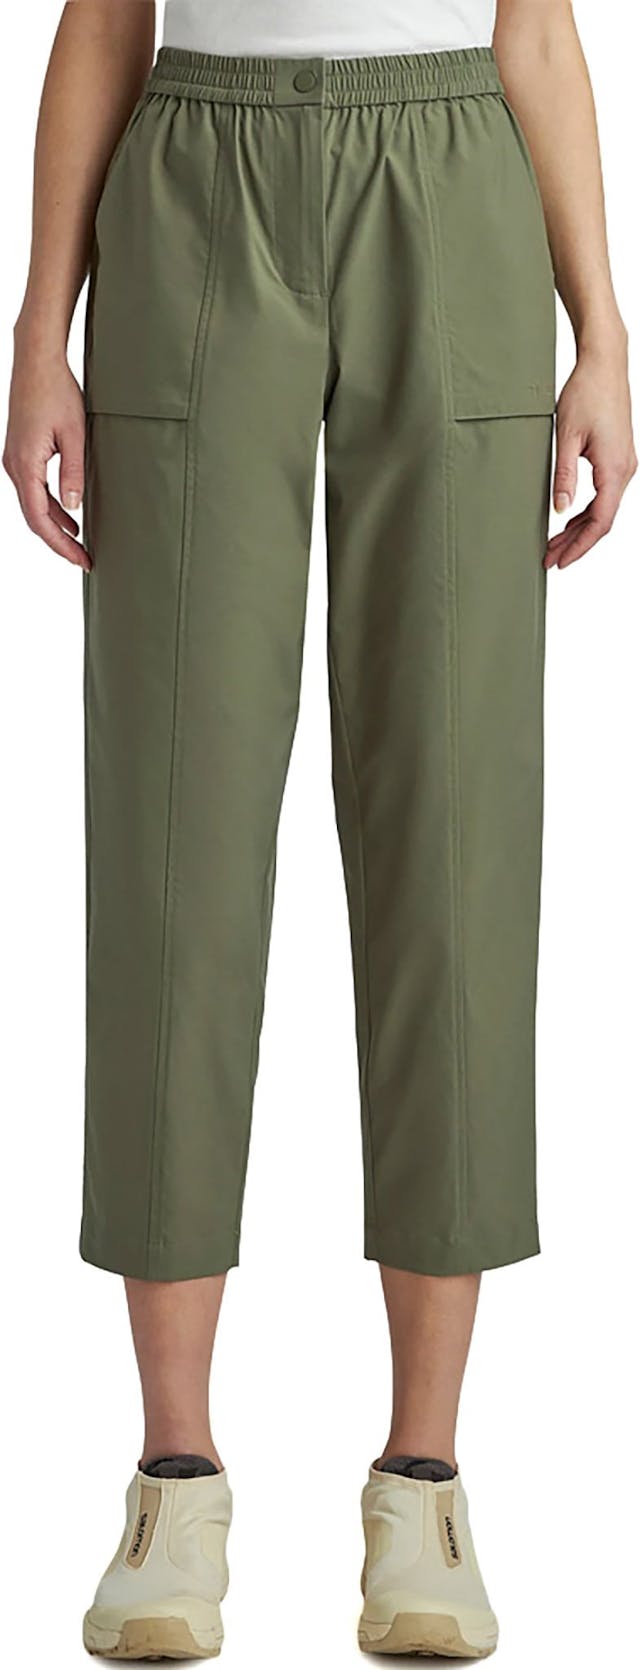 Product image for Tech Shield Pant - Women's